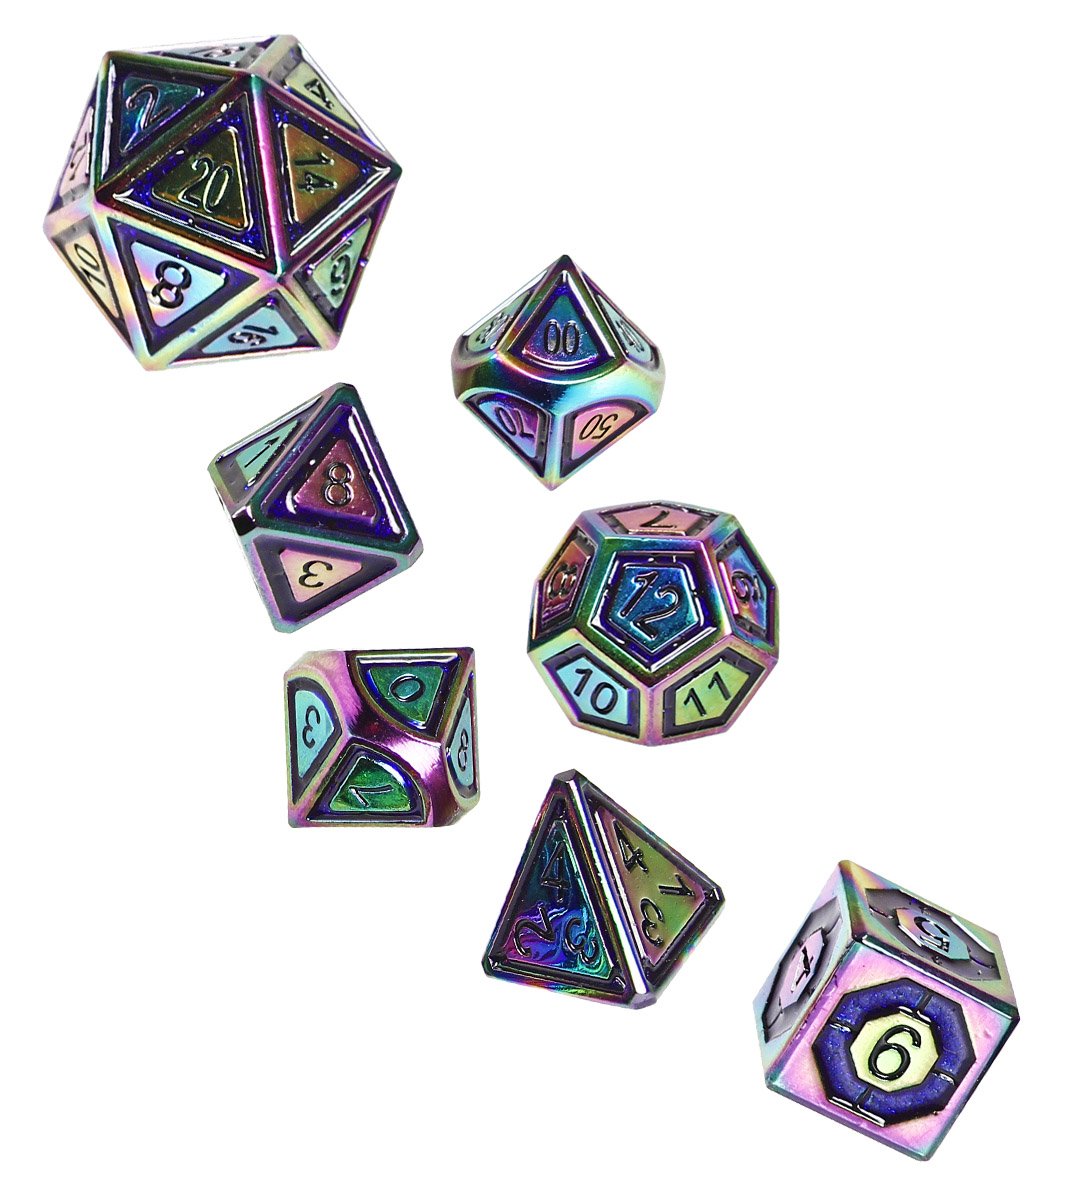 DnD Dice Sets For Every Character Class